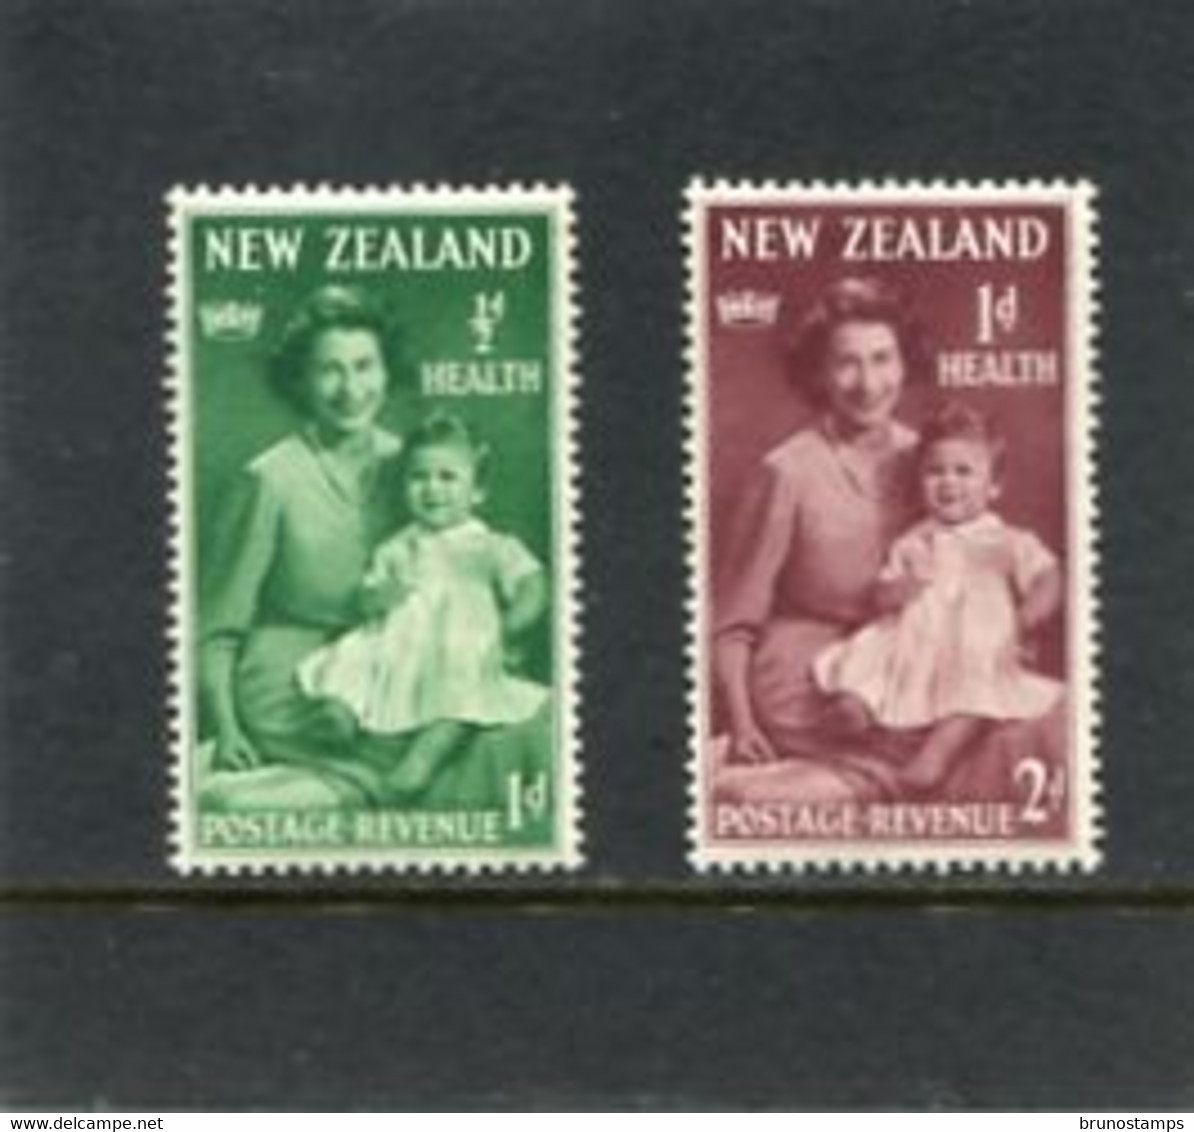 NEW ZEALAND - 1950  HEALTH STAMPS  SET  MINT NH - Unused Stamps